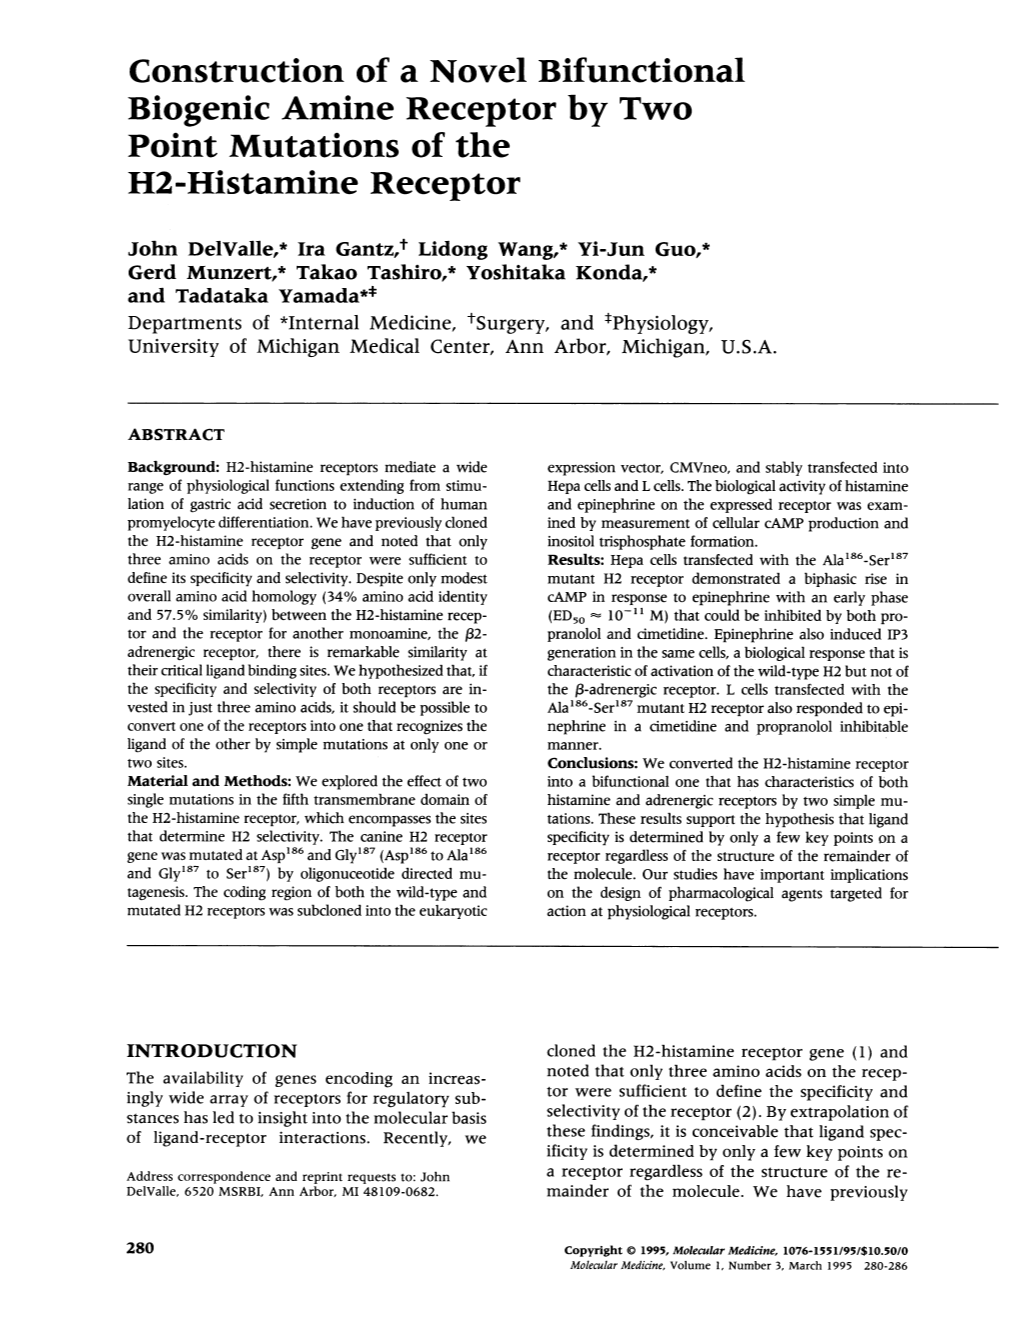 Construction of a Novel Bifunctional Biogenic Amine Receptor by Two Point Mutations of the H2-Histamine Receptor